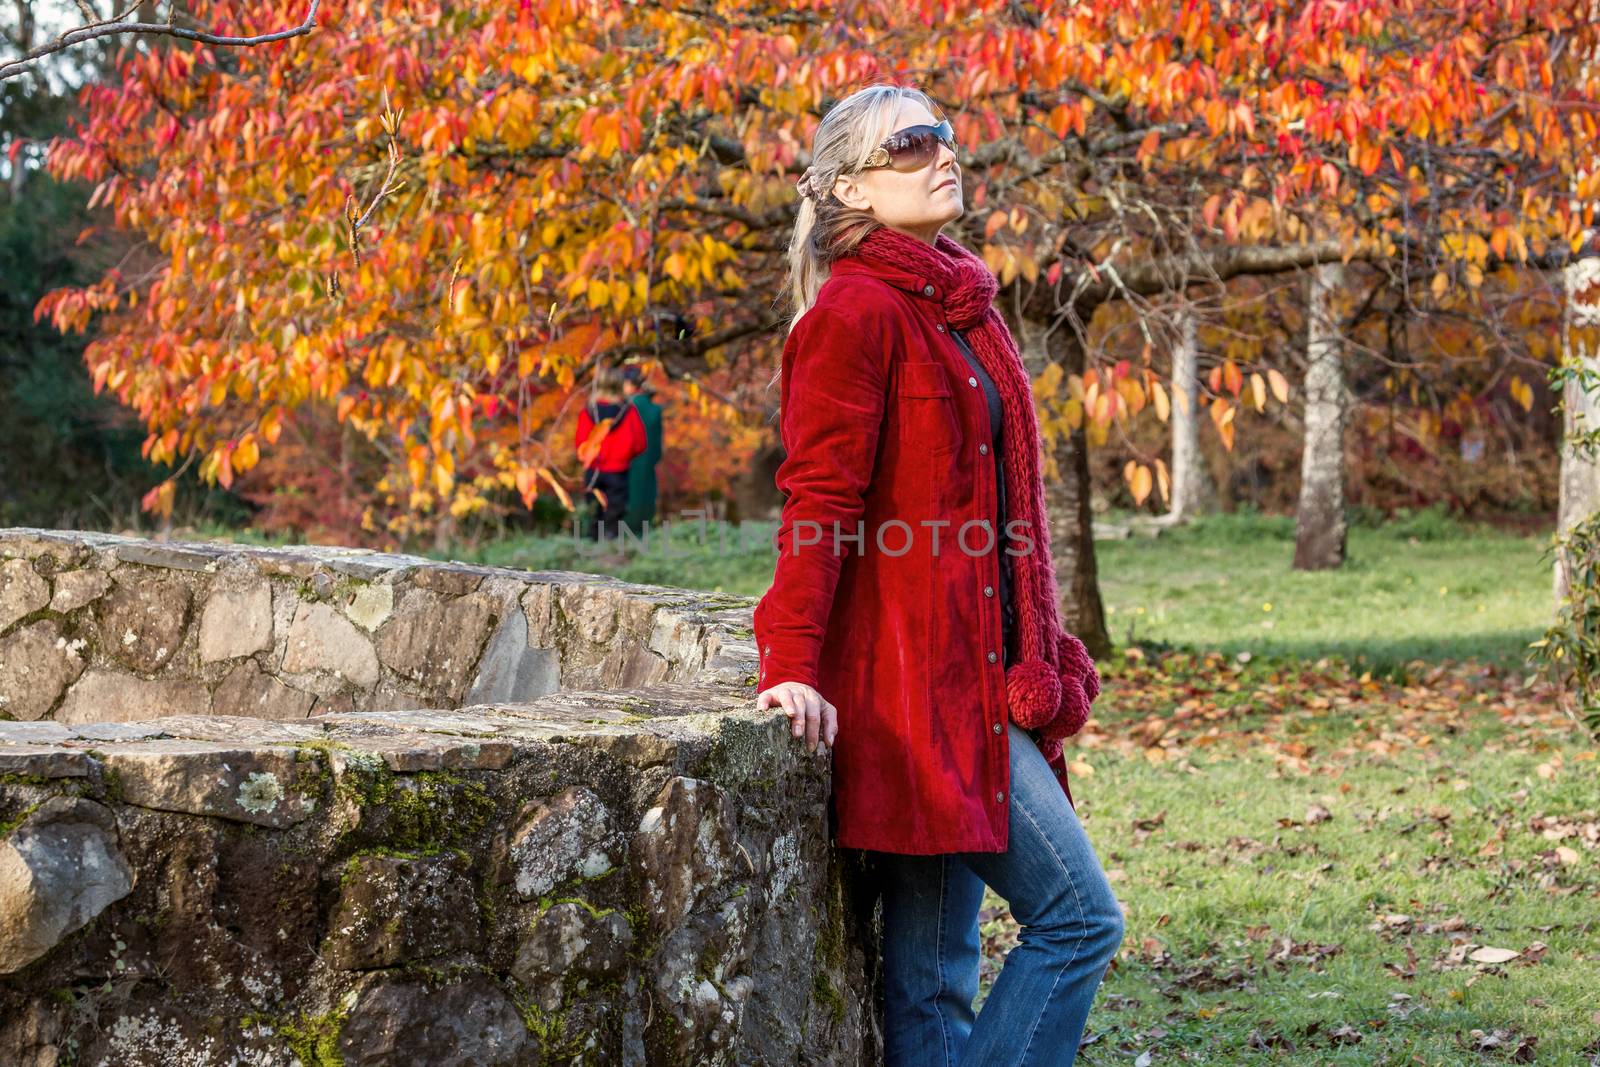 Woman rests against rustic stone fence among autumn trees